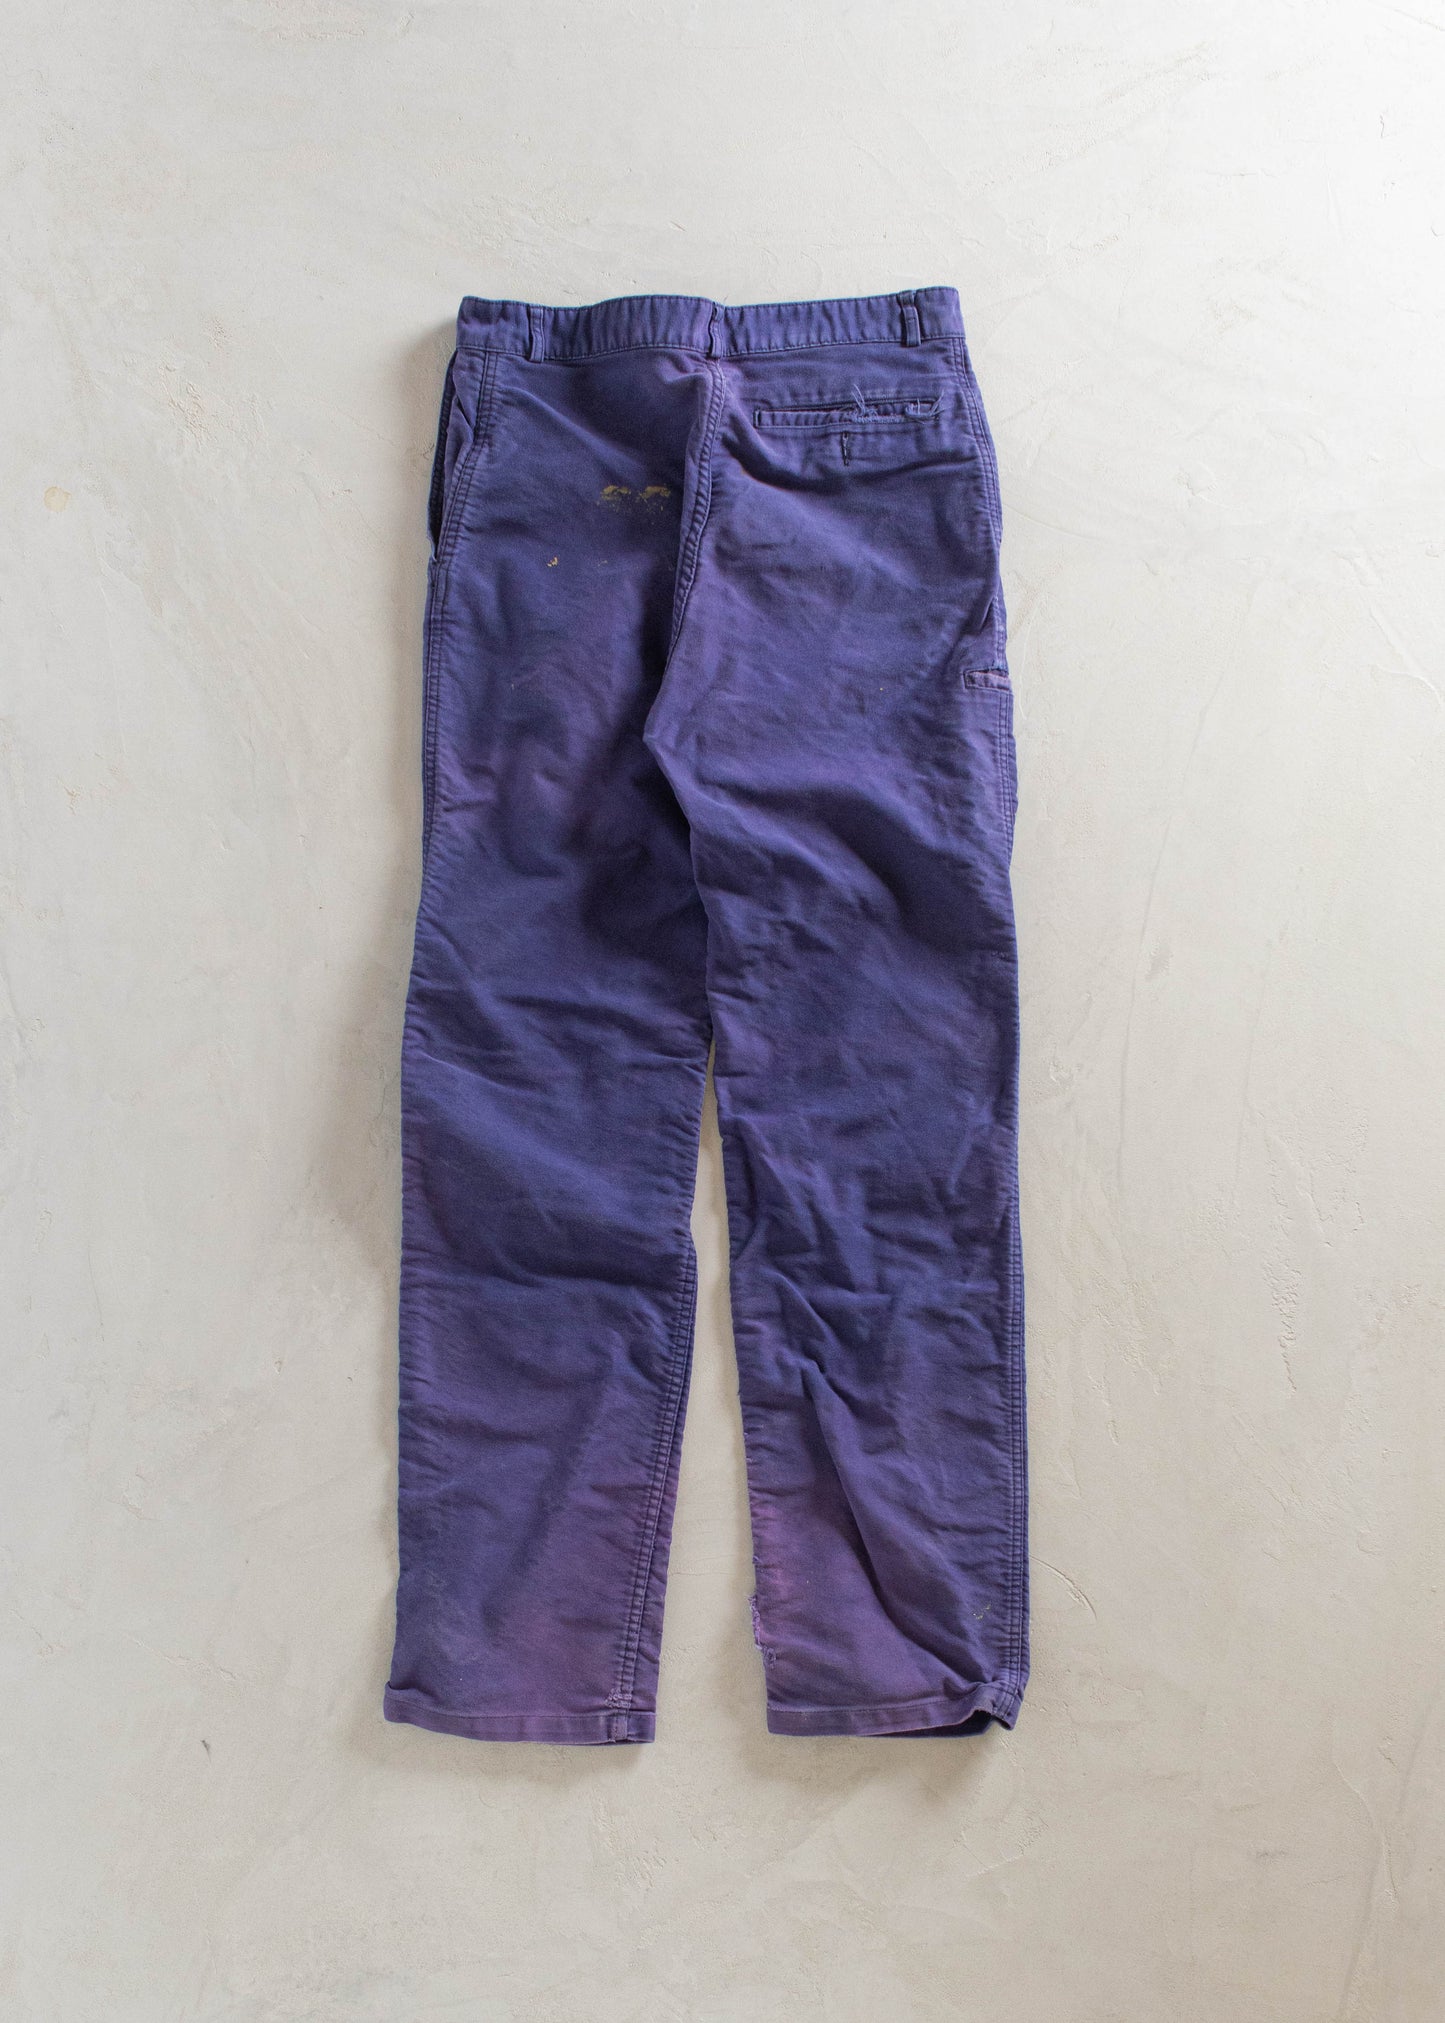 1980s Adolphe Lafont French Workwear Pants Size Women's 31 Men's 33